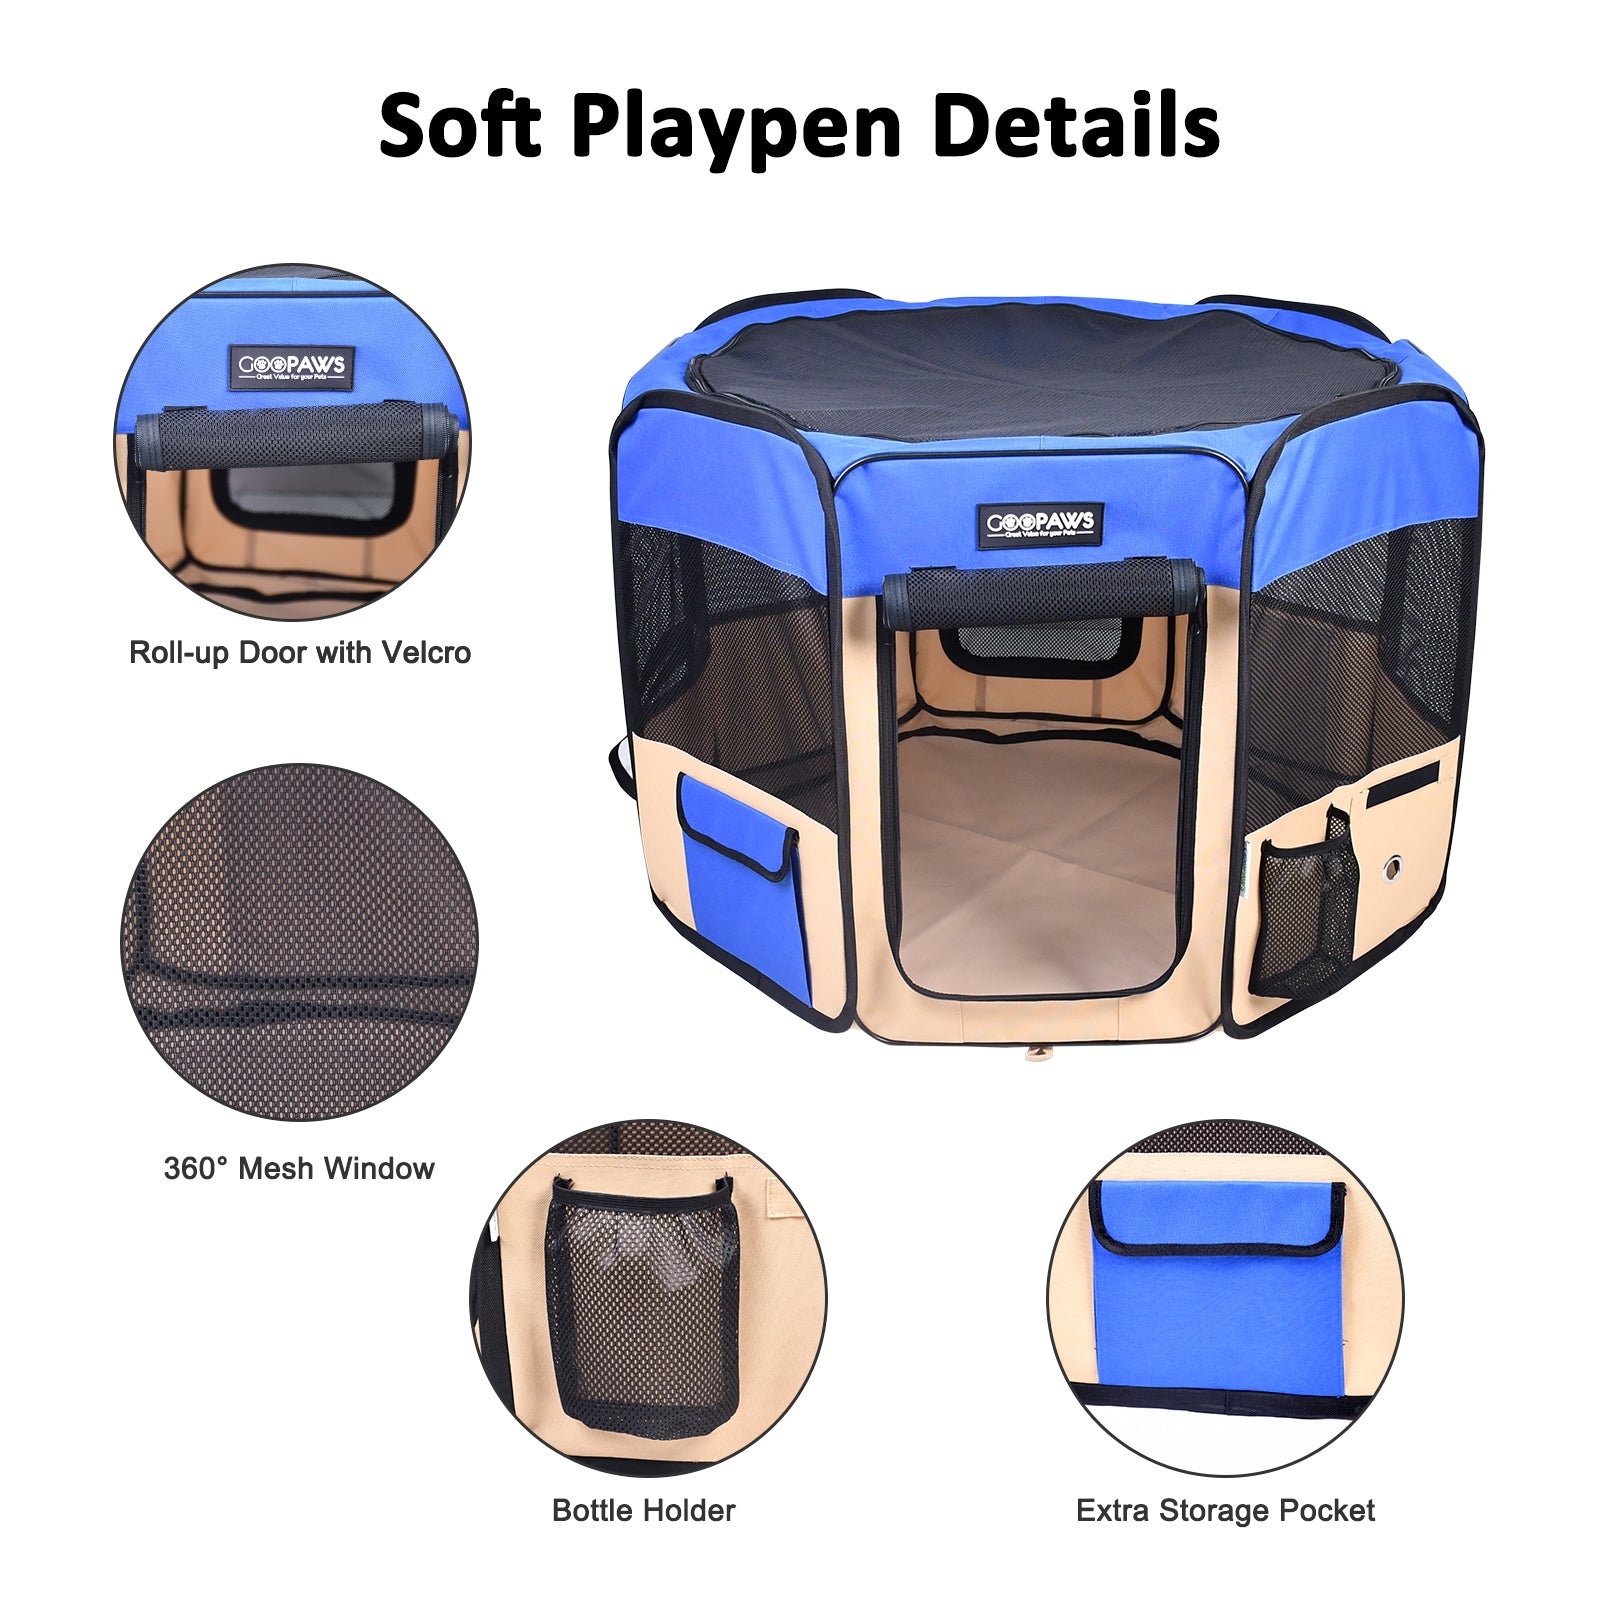 Jespet 2-Door Portable Soft-Sided Dog, Cat & Small Pet Exercise Playpen, Blue, 36''